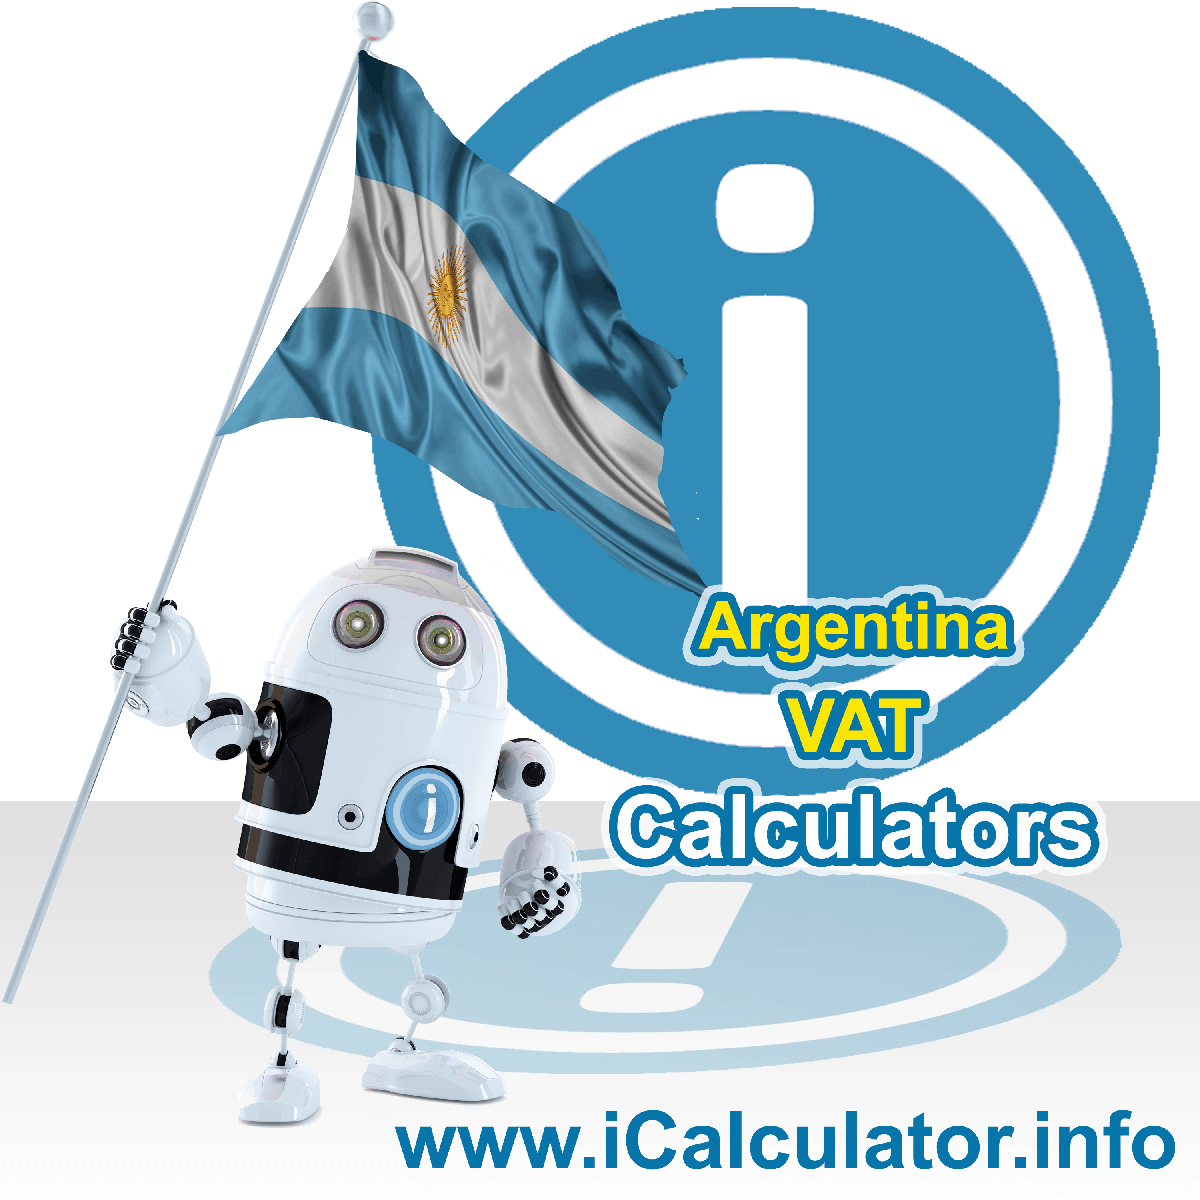 Argentina VAT Calculator. This image shows the Argentina flag and information relating to the VAT formula used for calculating Value Added Tax in Argentina using the Argentina VAT Calculator in 2023